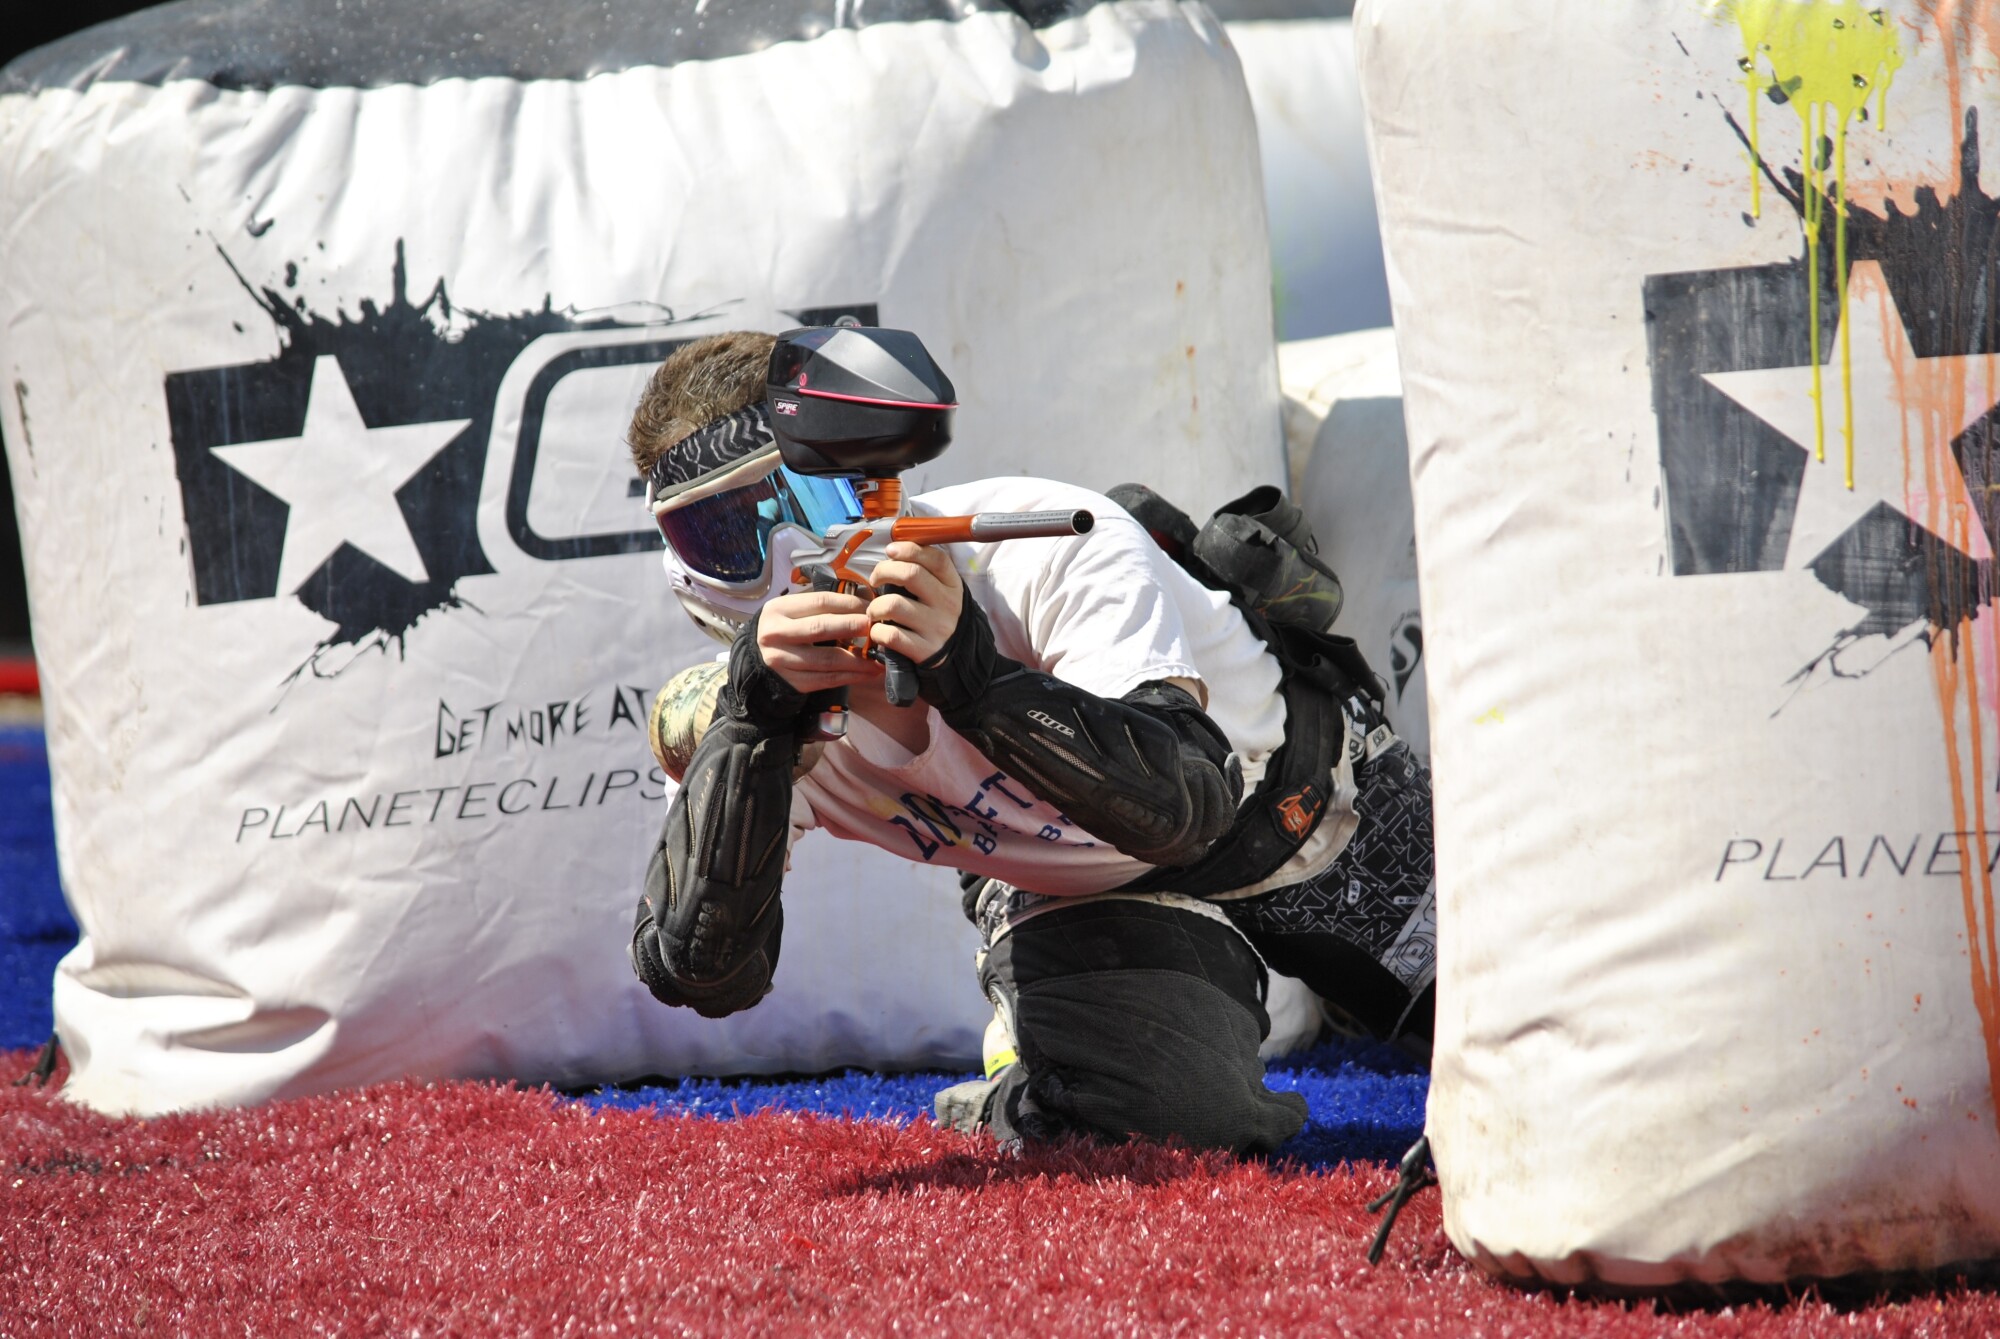 What to Wear to Play Paintball